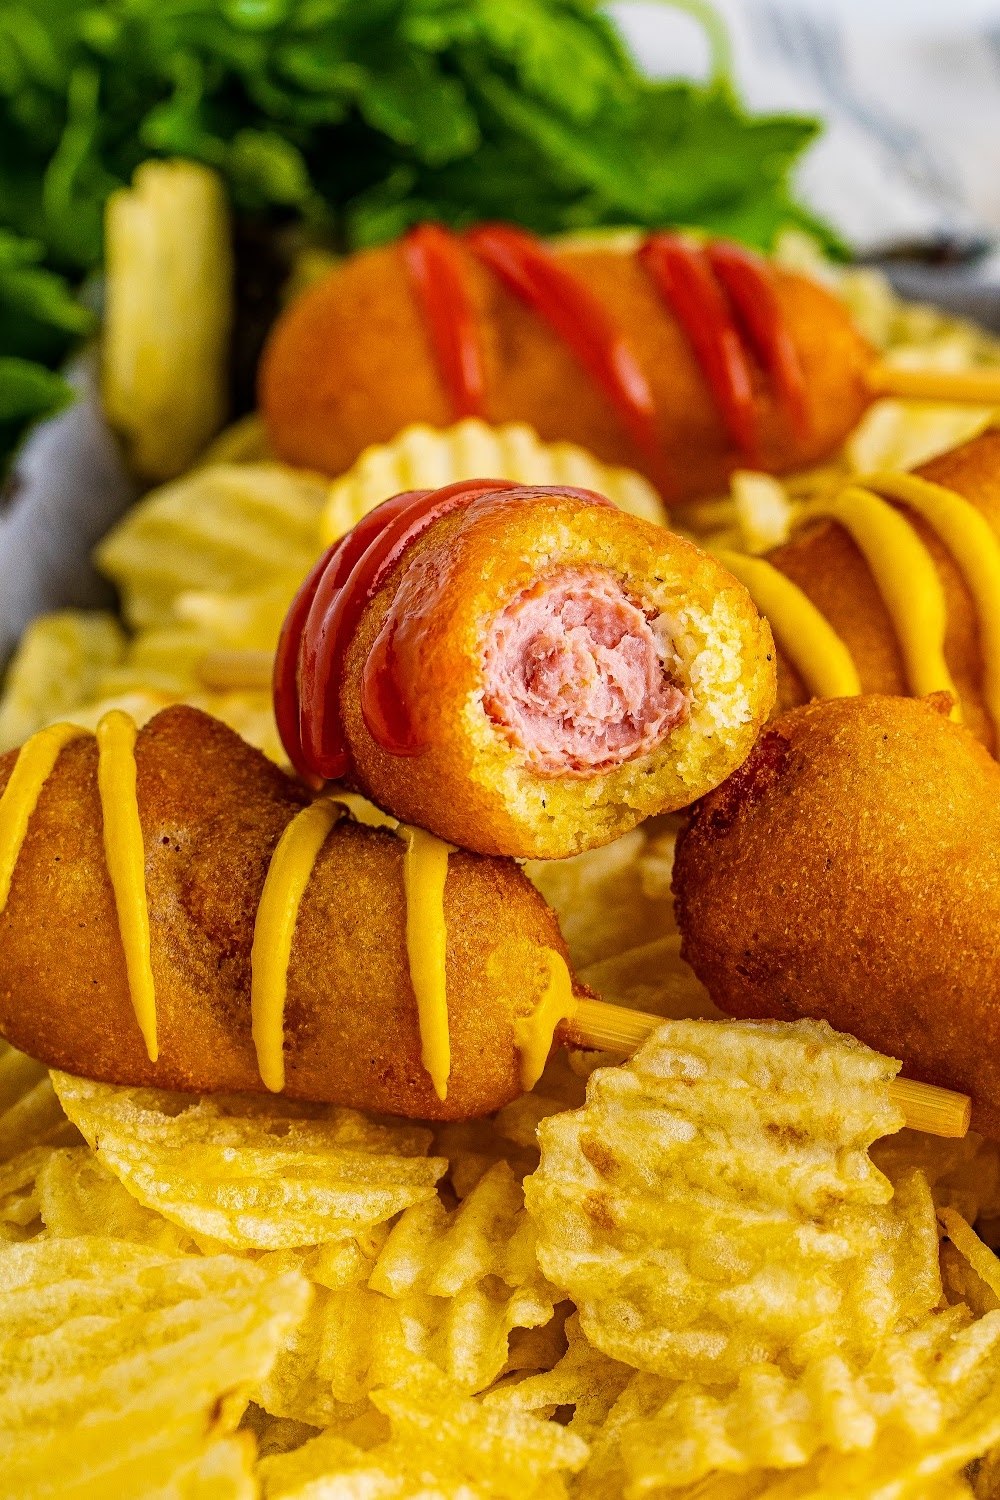 Mini Homemade Corn Dogs some drizzled with ketchup or mustard lay on a bed of potato chips. One corn dog is missing a bite showing both the cornmeal coating and the hotdog inside.